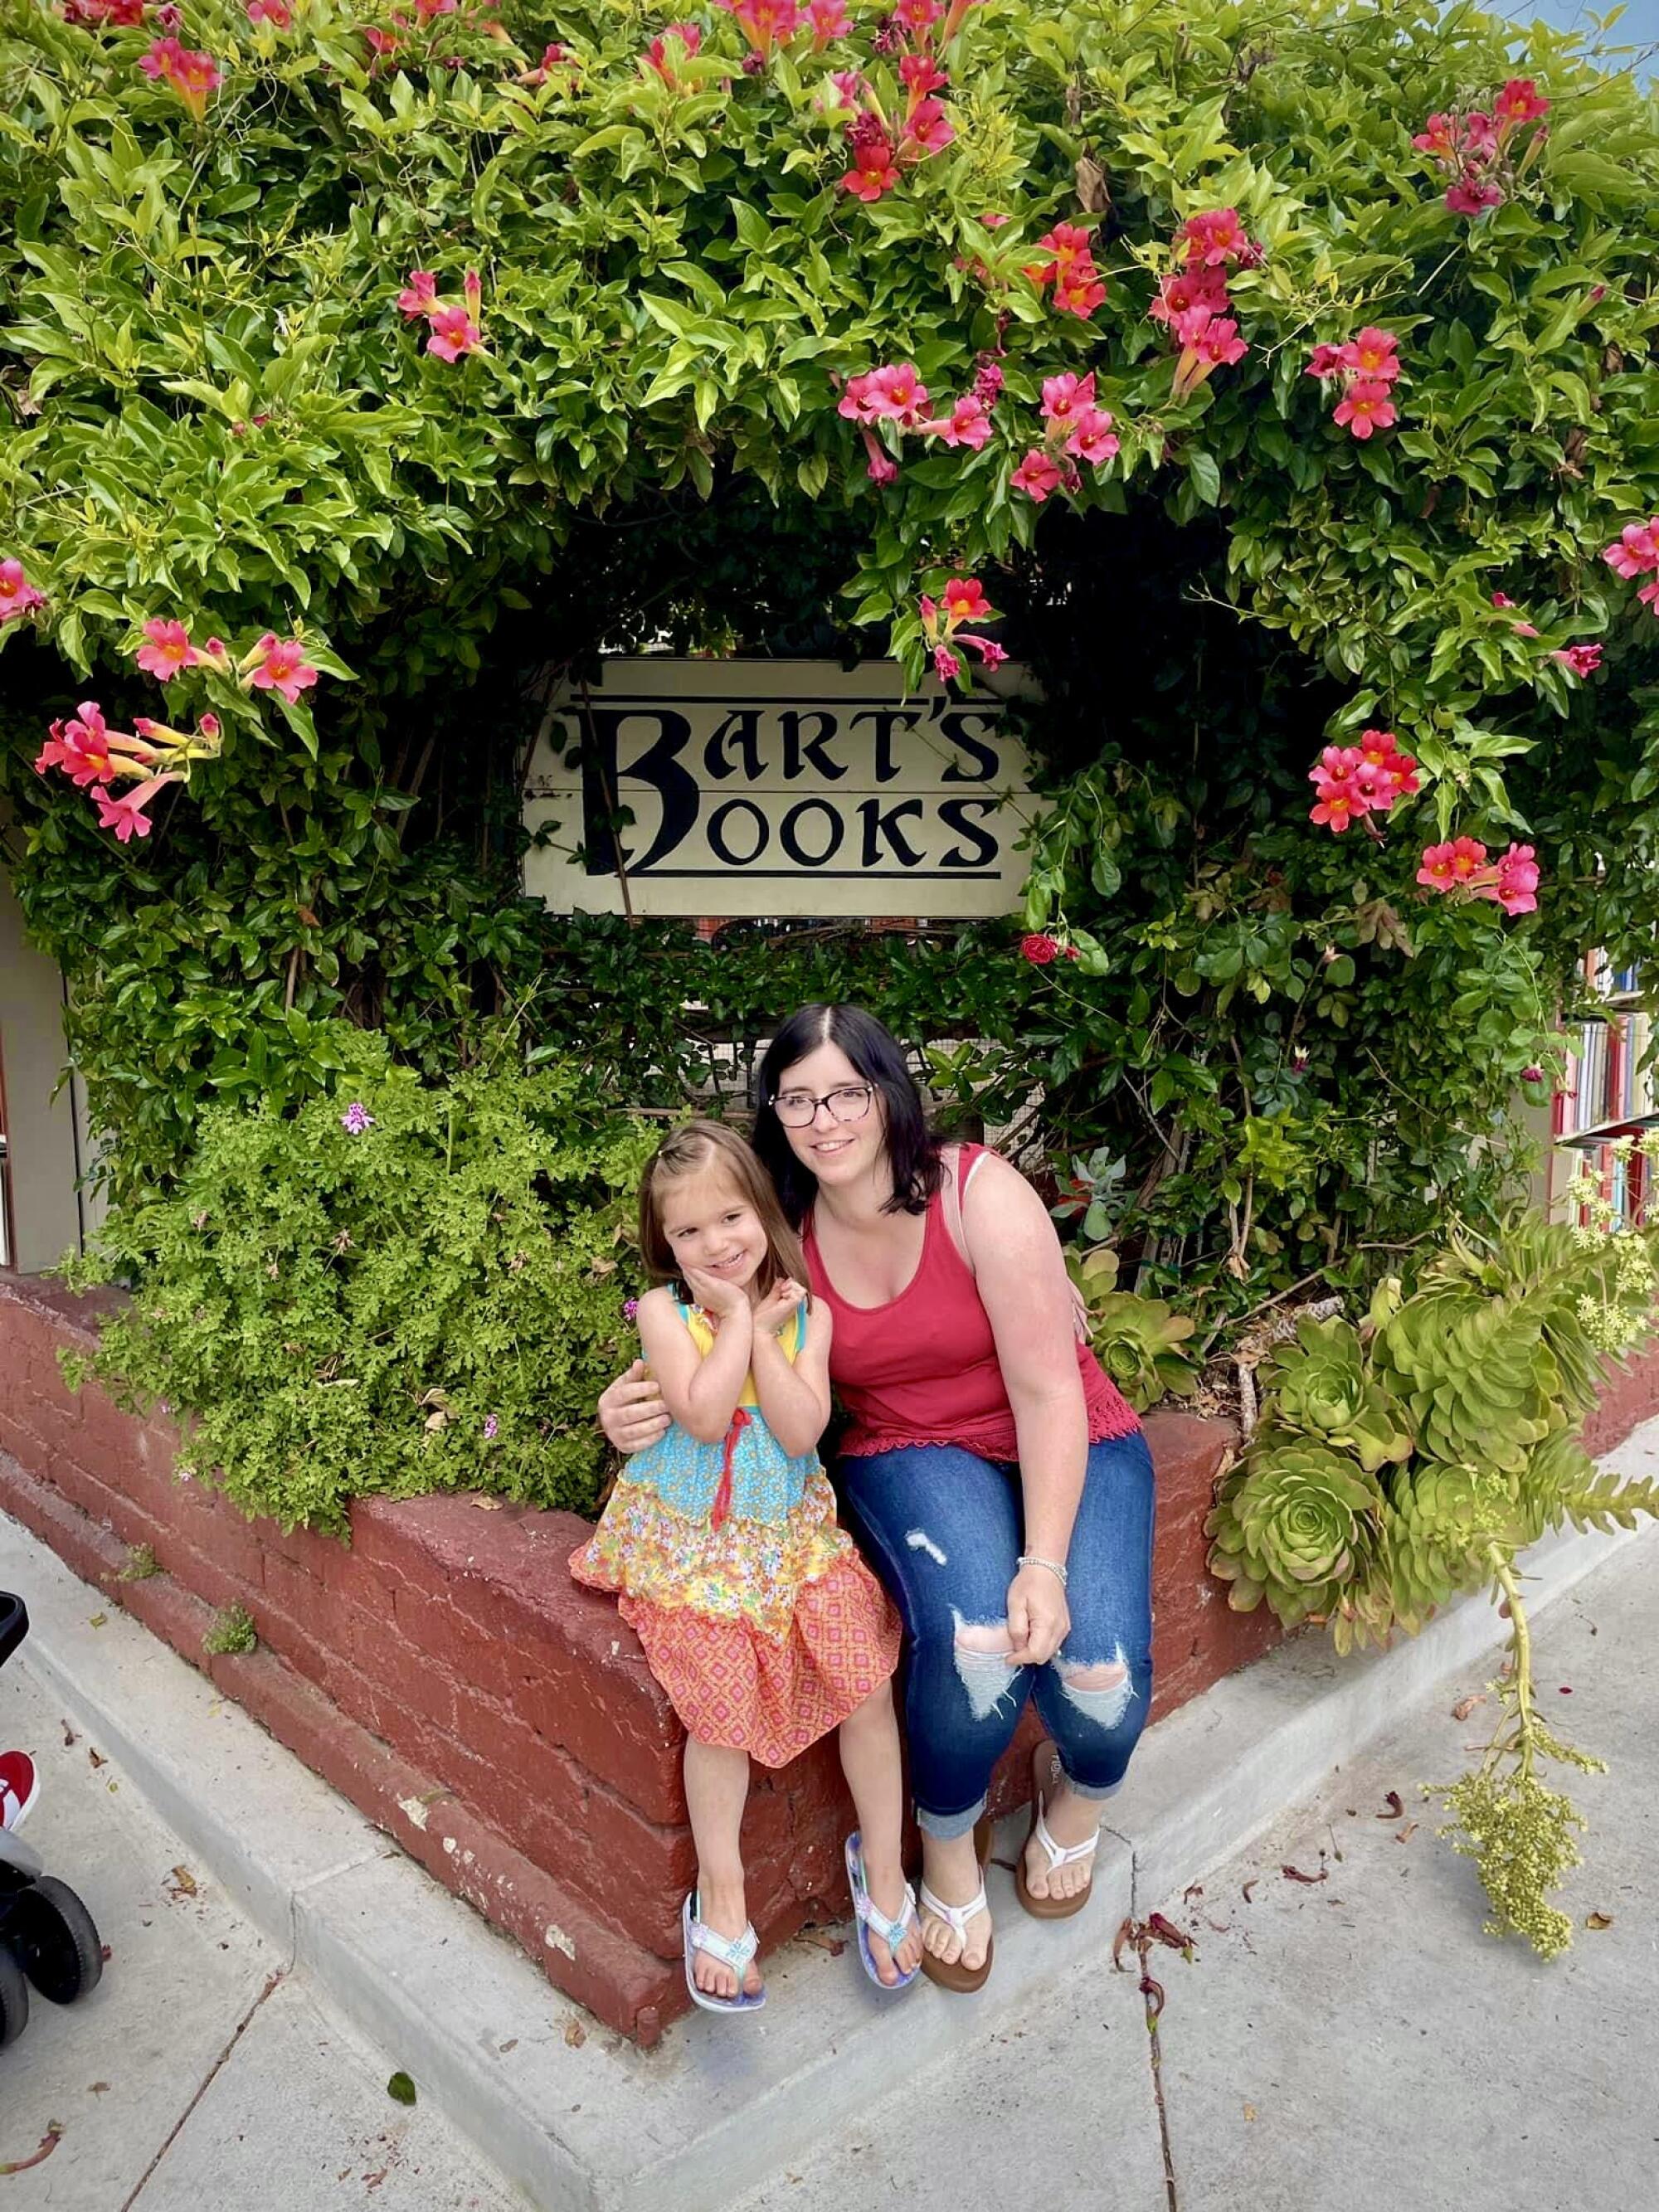 A mother and daughter sit in front of the Bart's Books sign, surrounded by flowers and greenery.